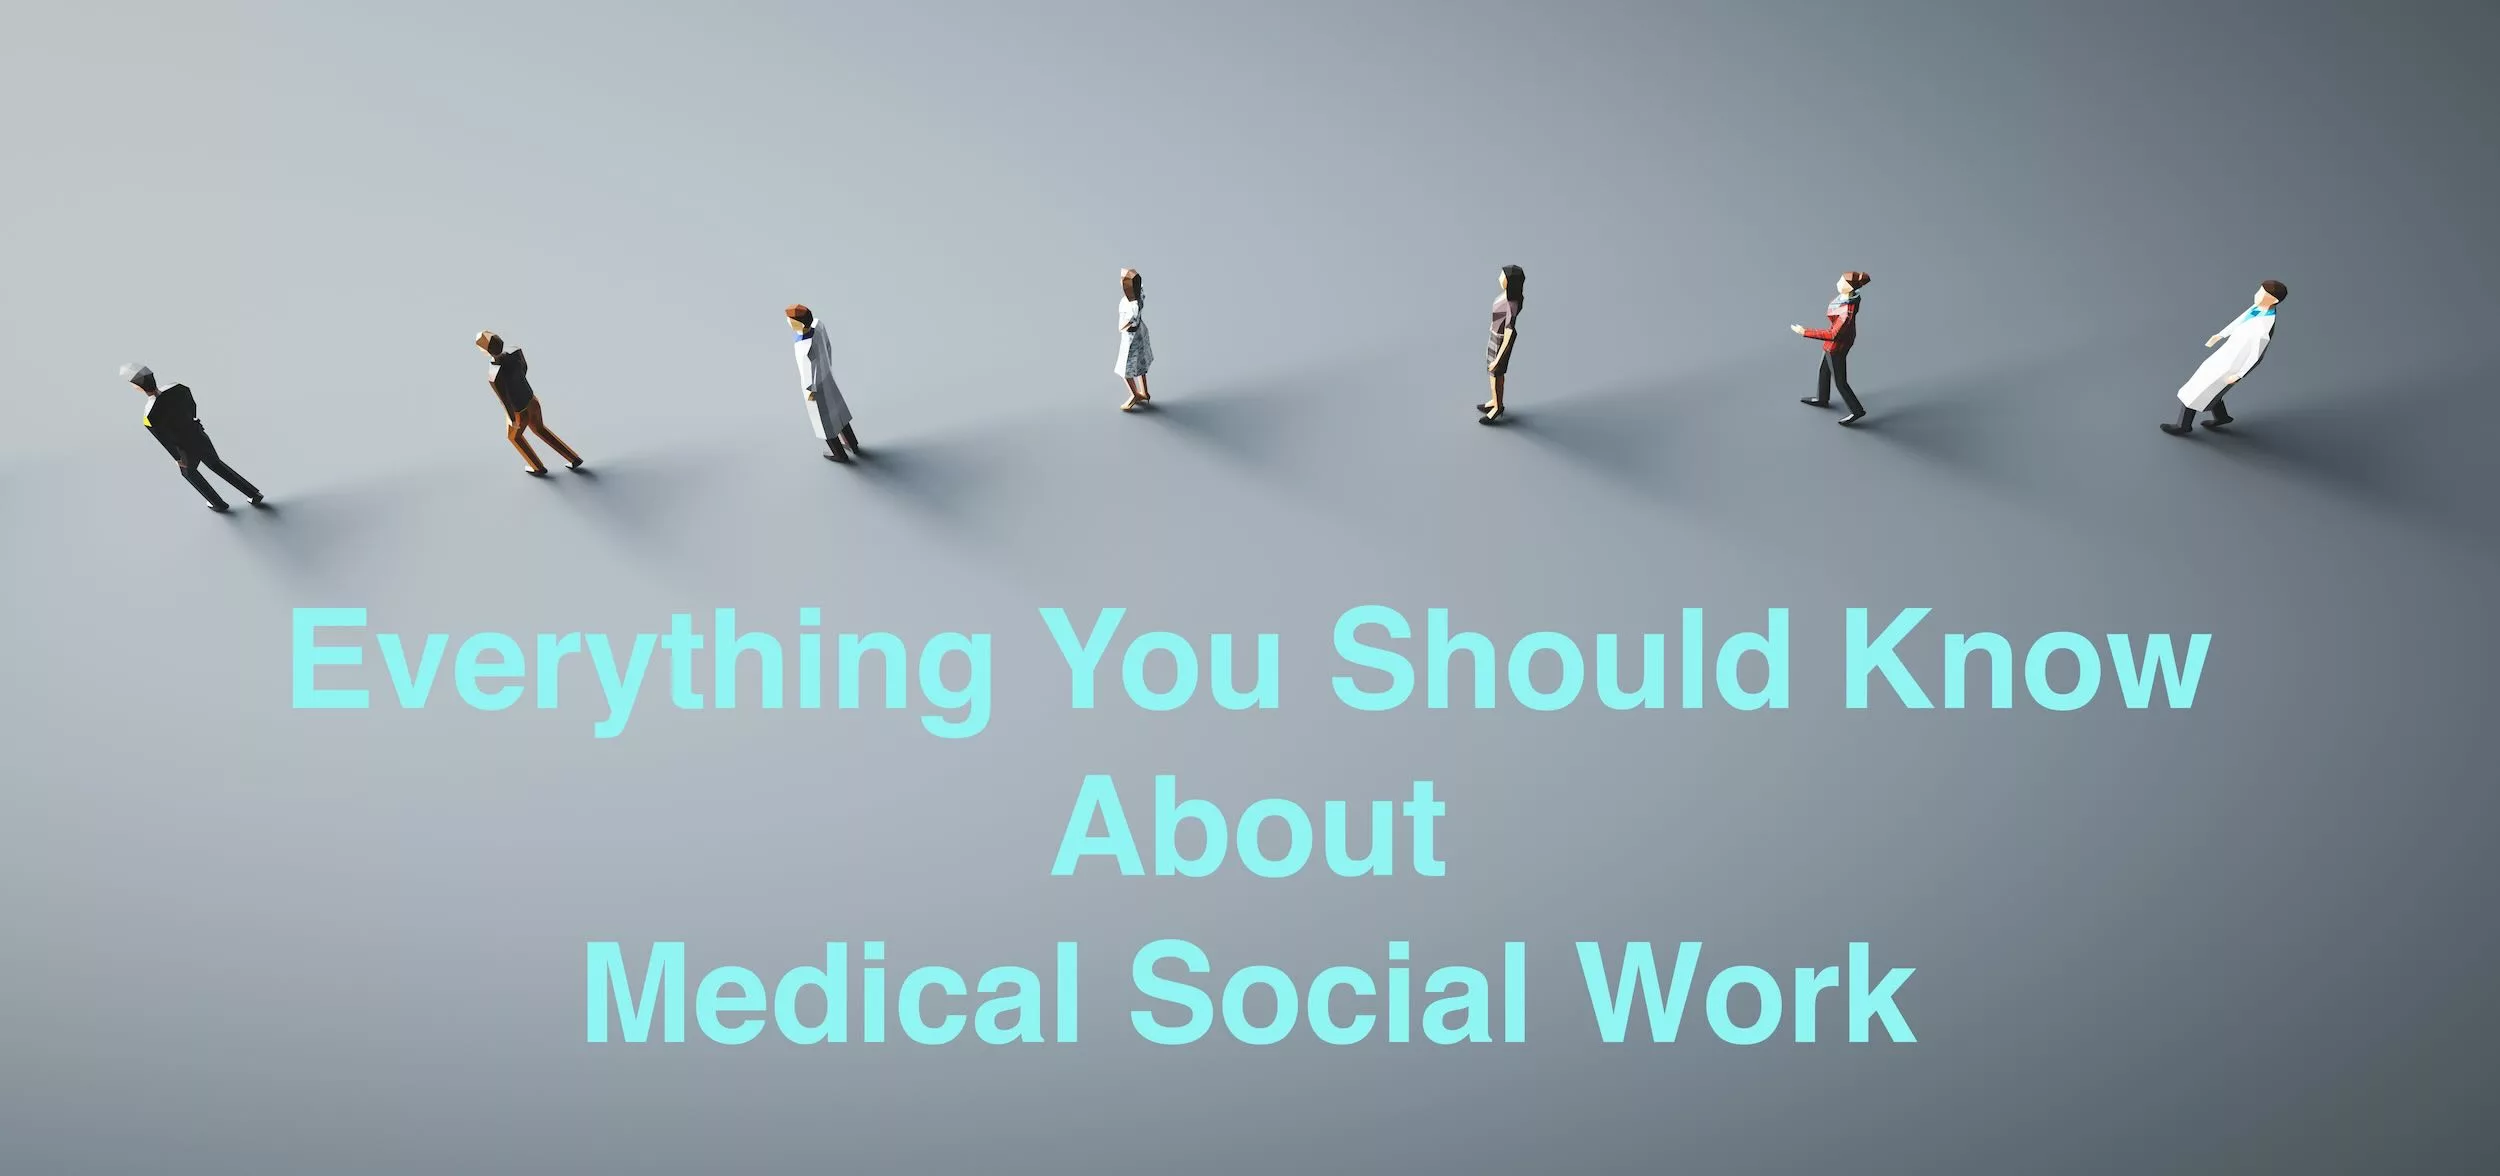 role of social worker in medical setting